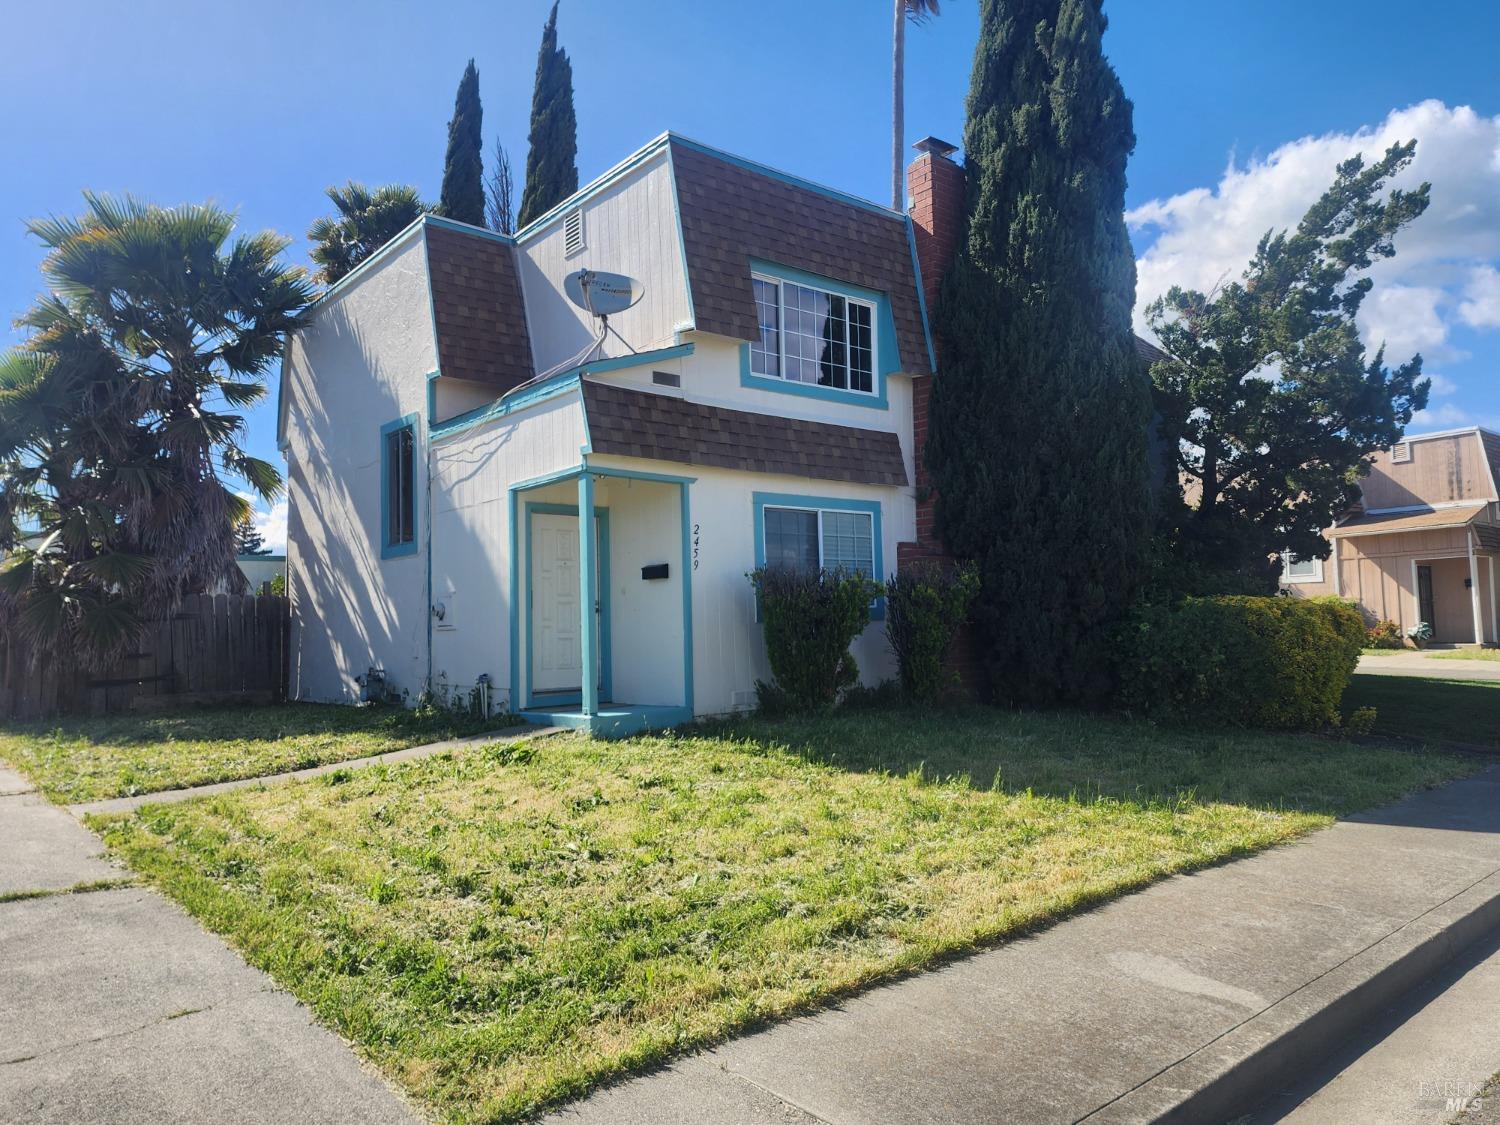 Photo of 2459 Baltic Dr in Fairfield, CA